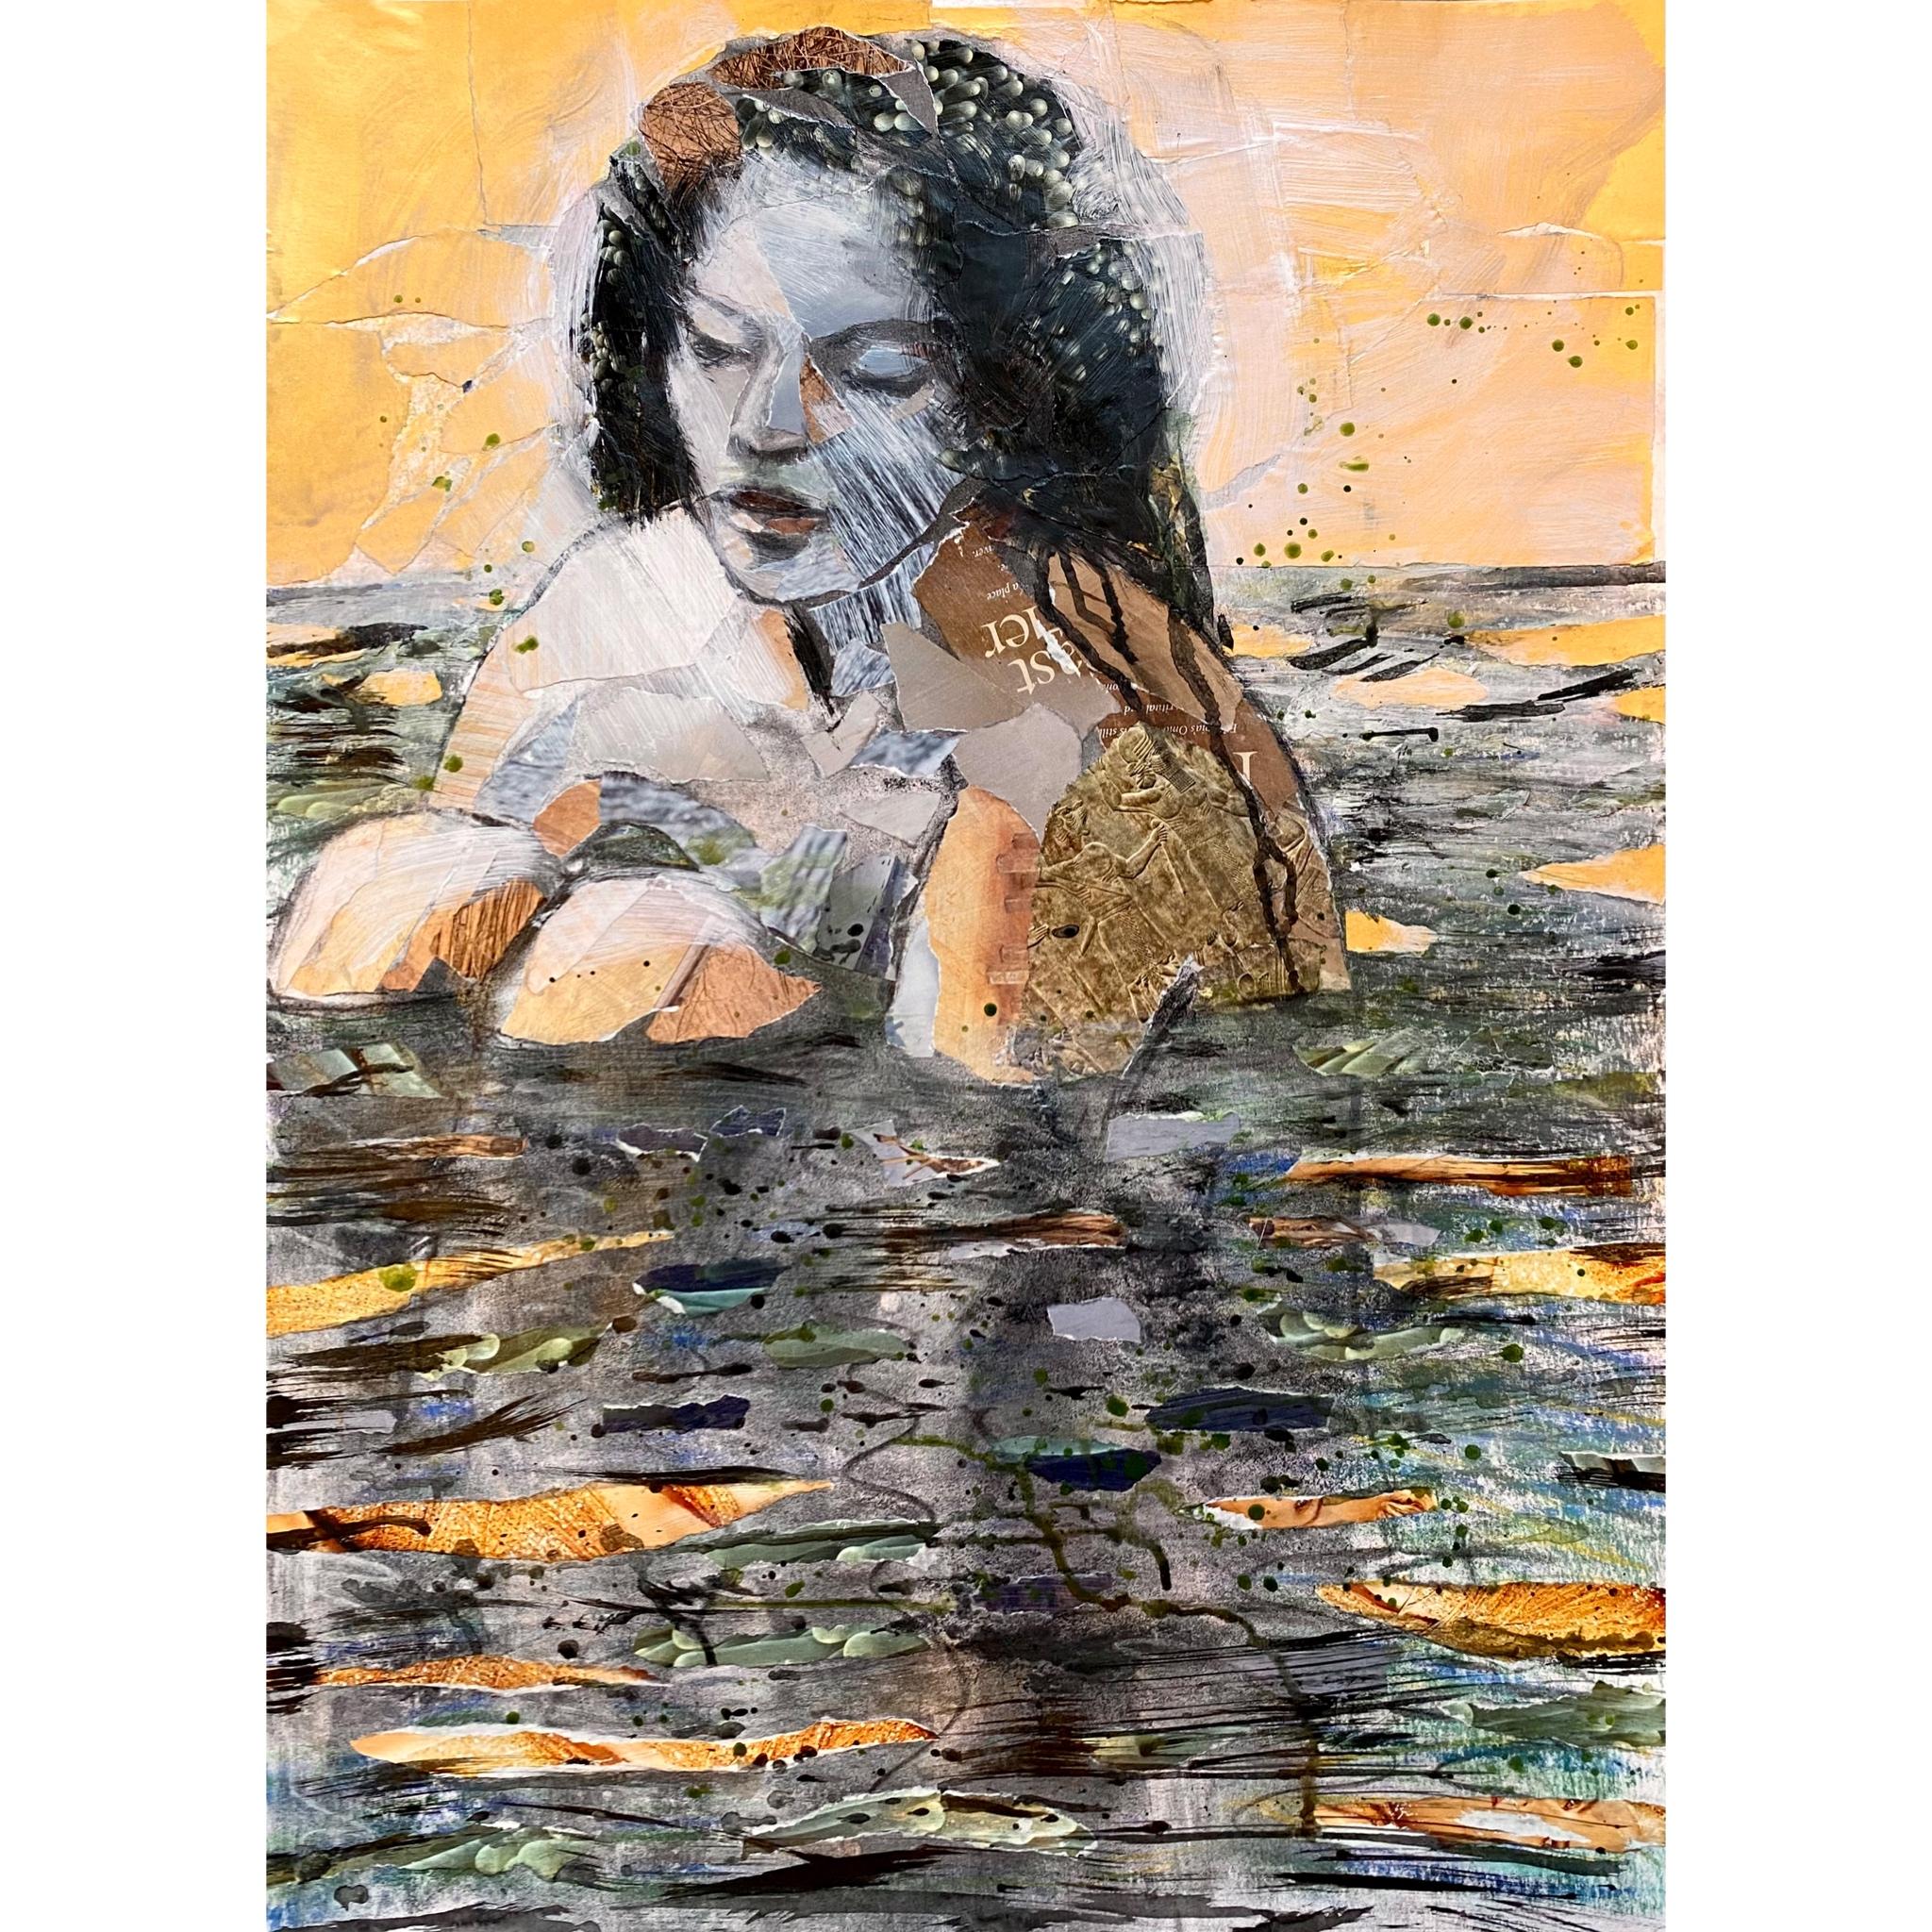 Golden Mermaid, drawing  collage female figure in water with text, maps